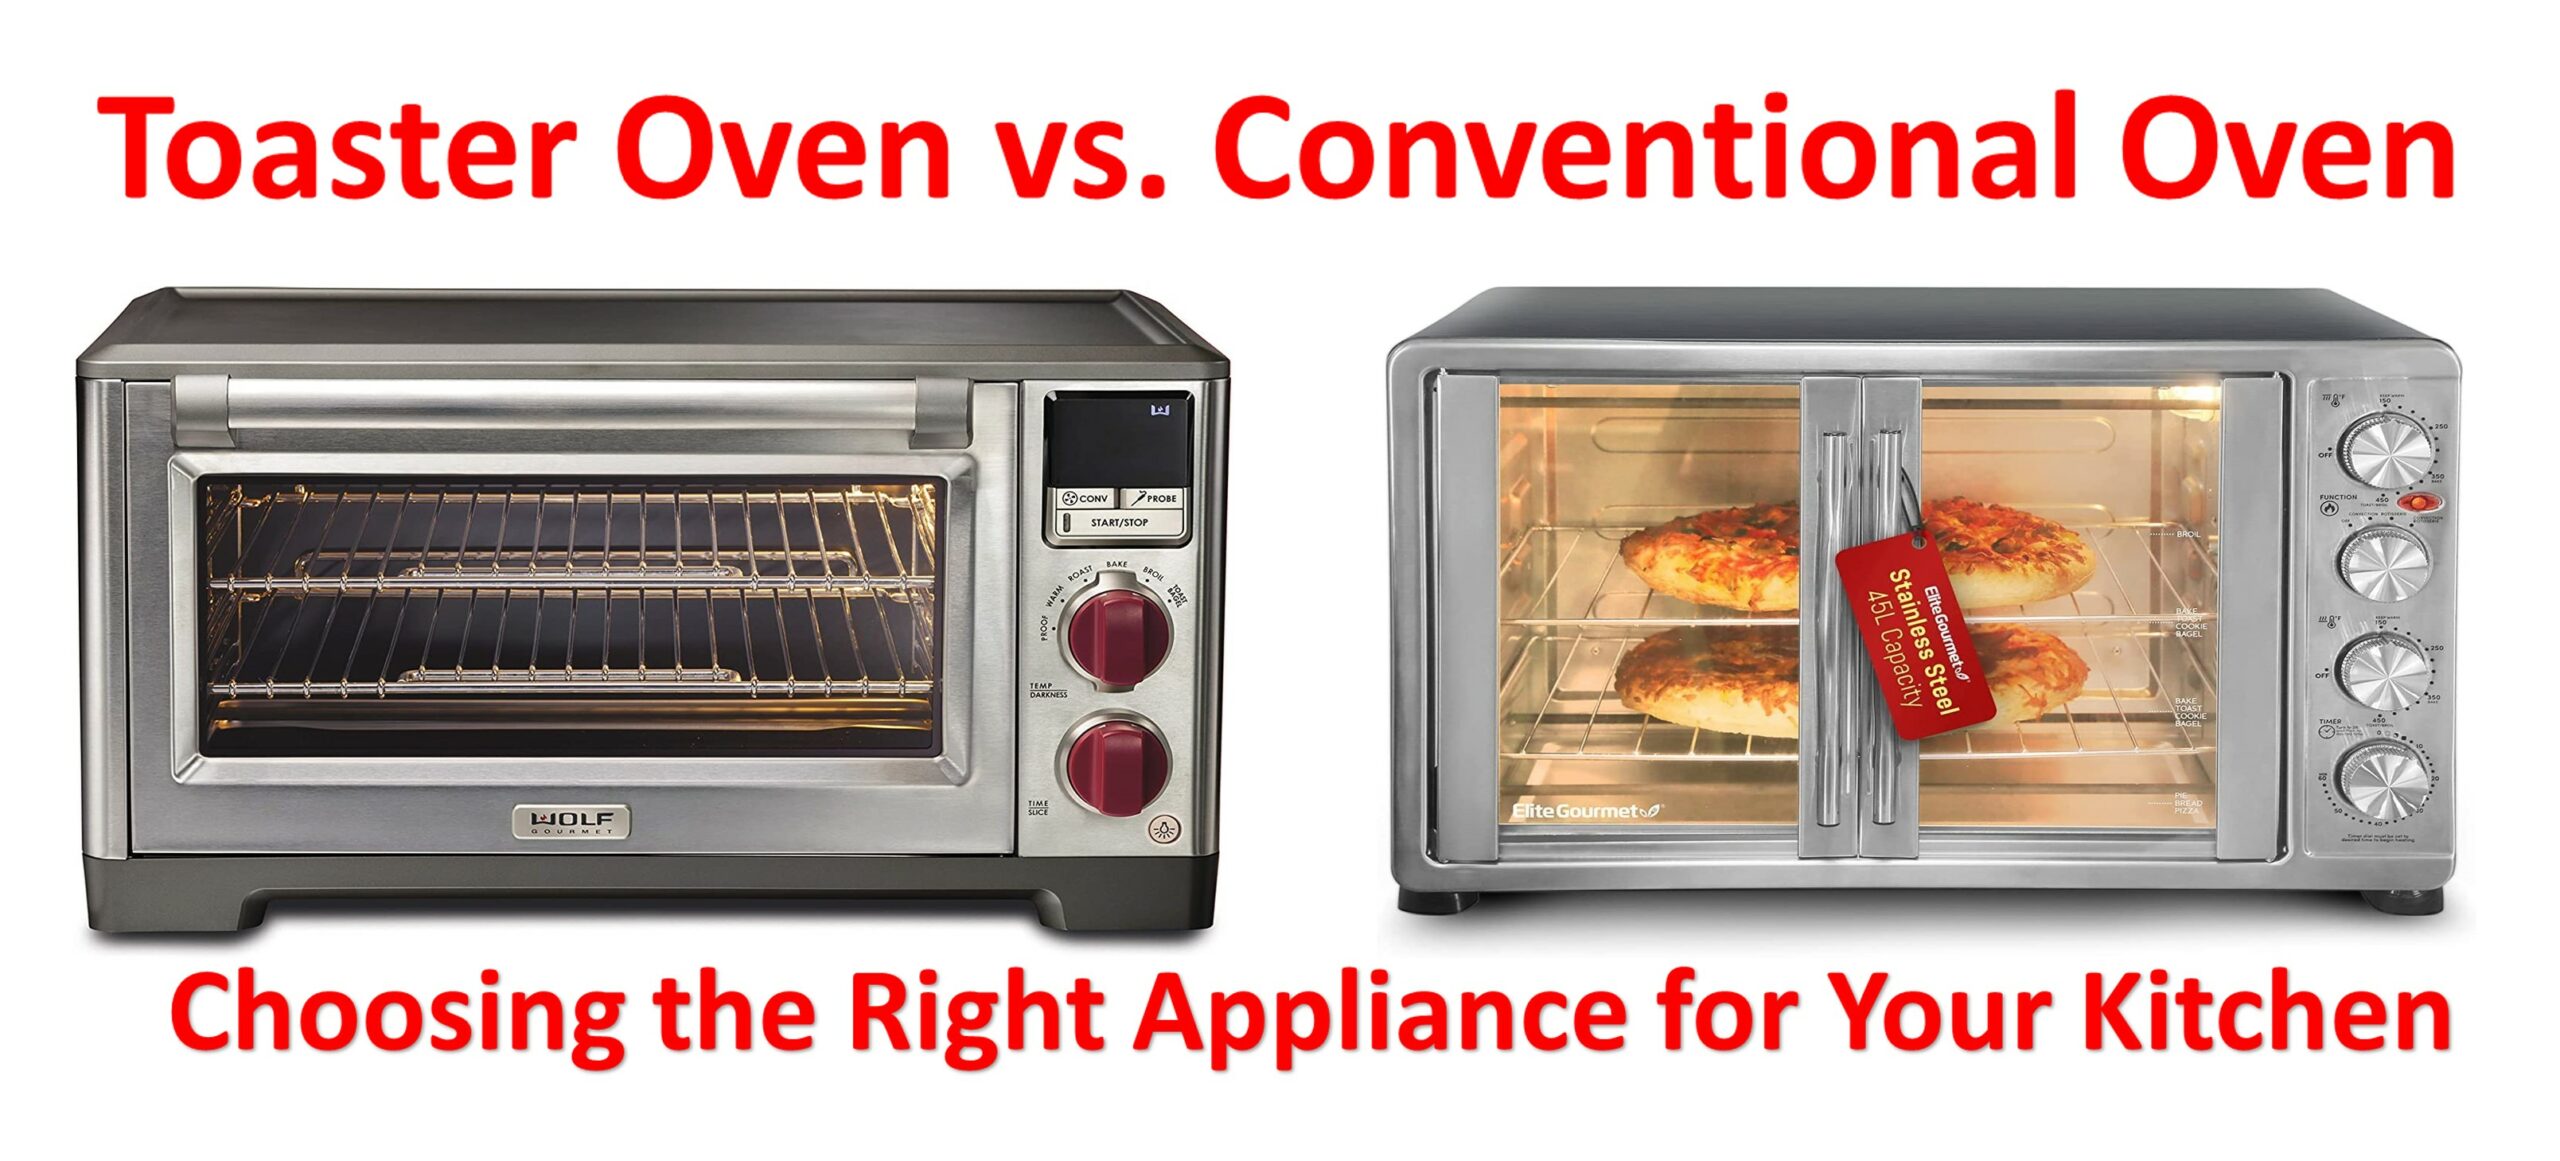 toaster oven vs. conventional oven